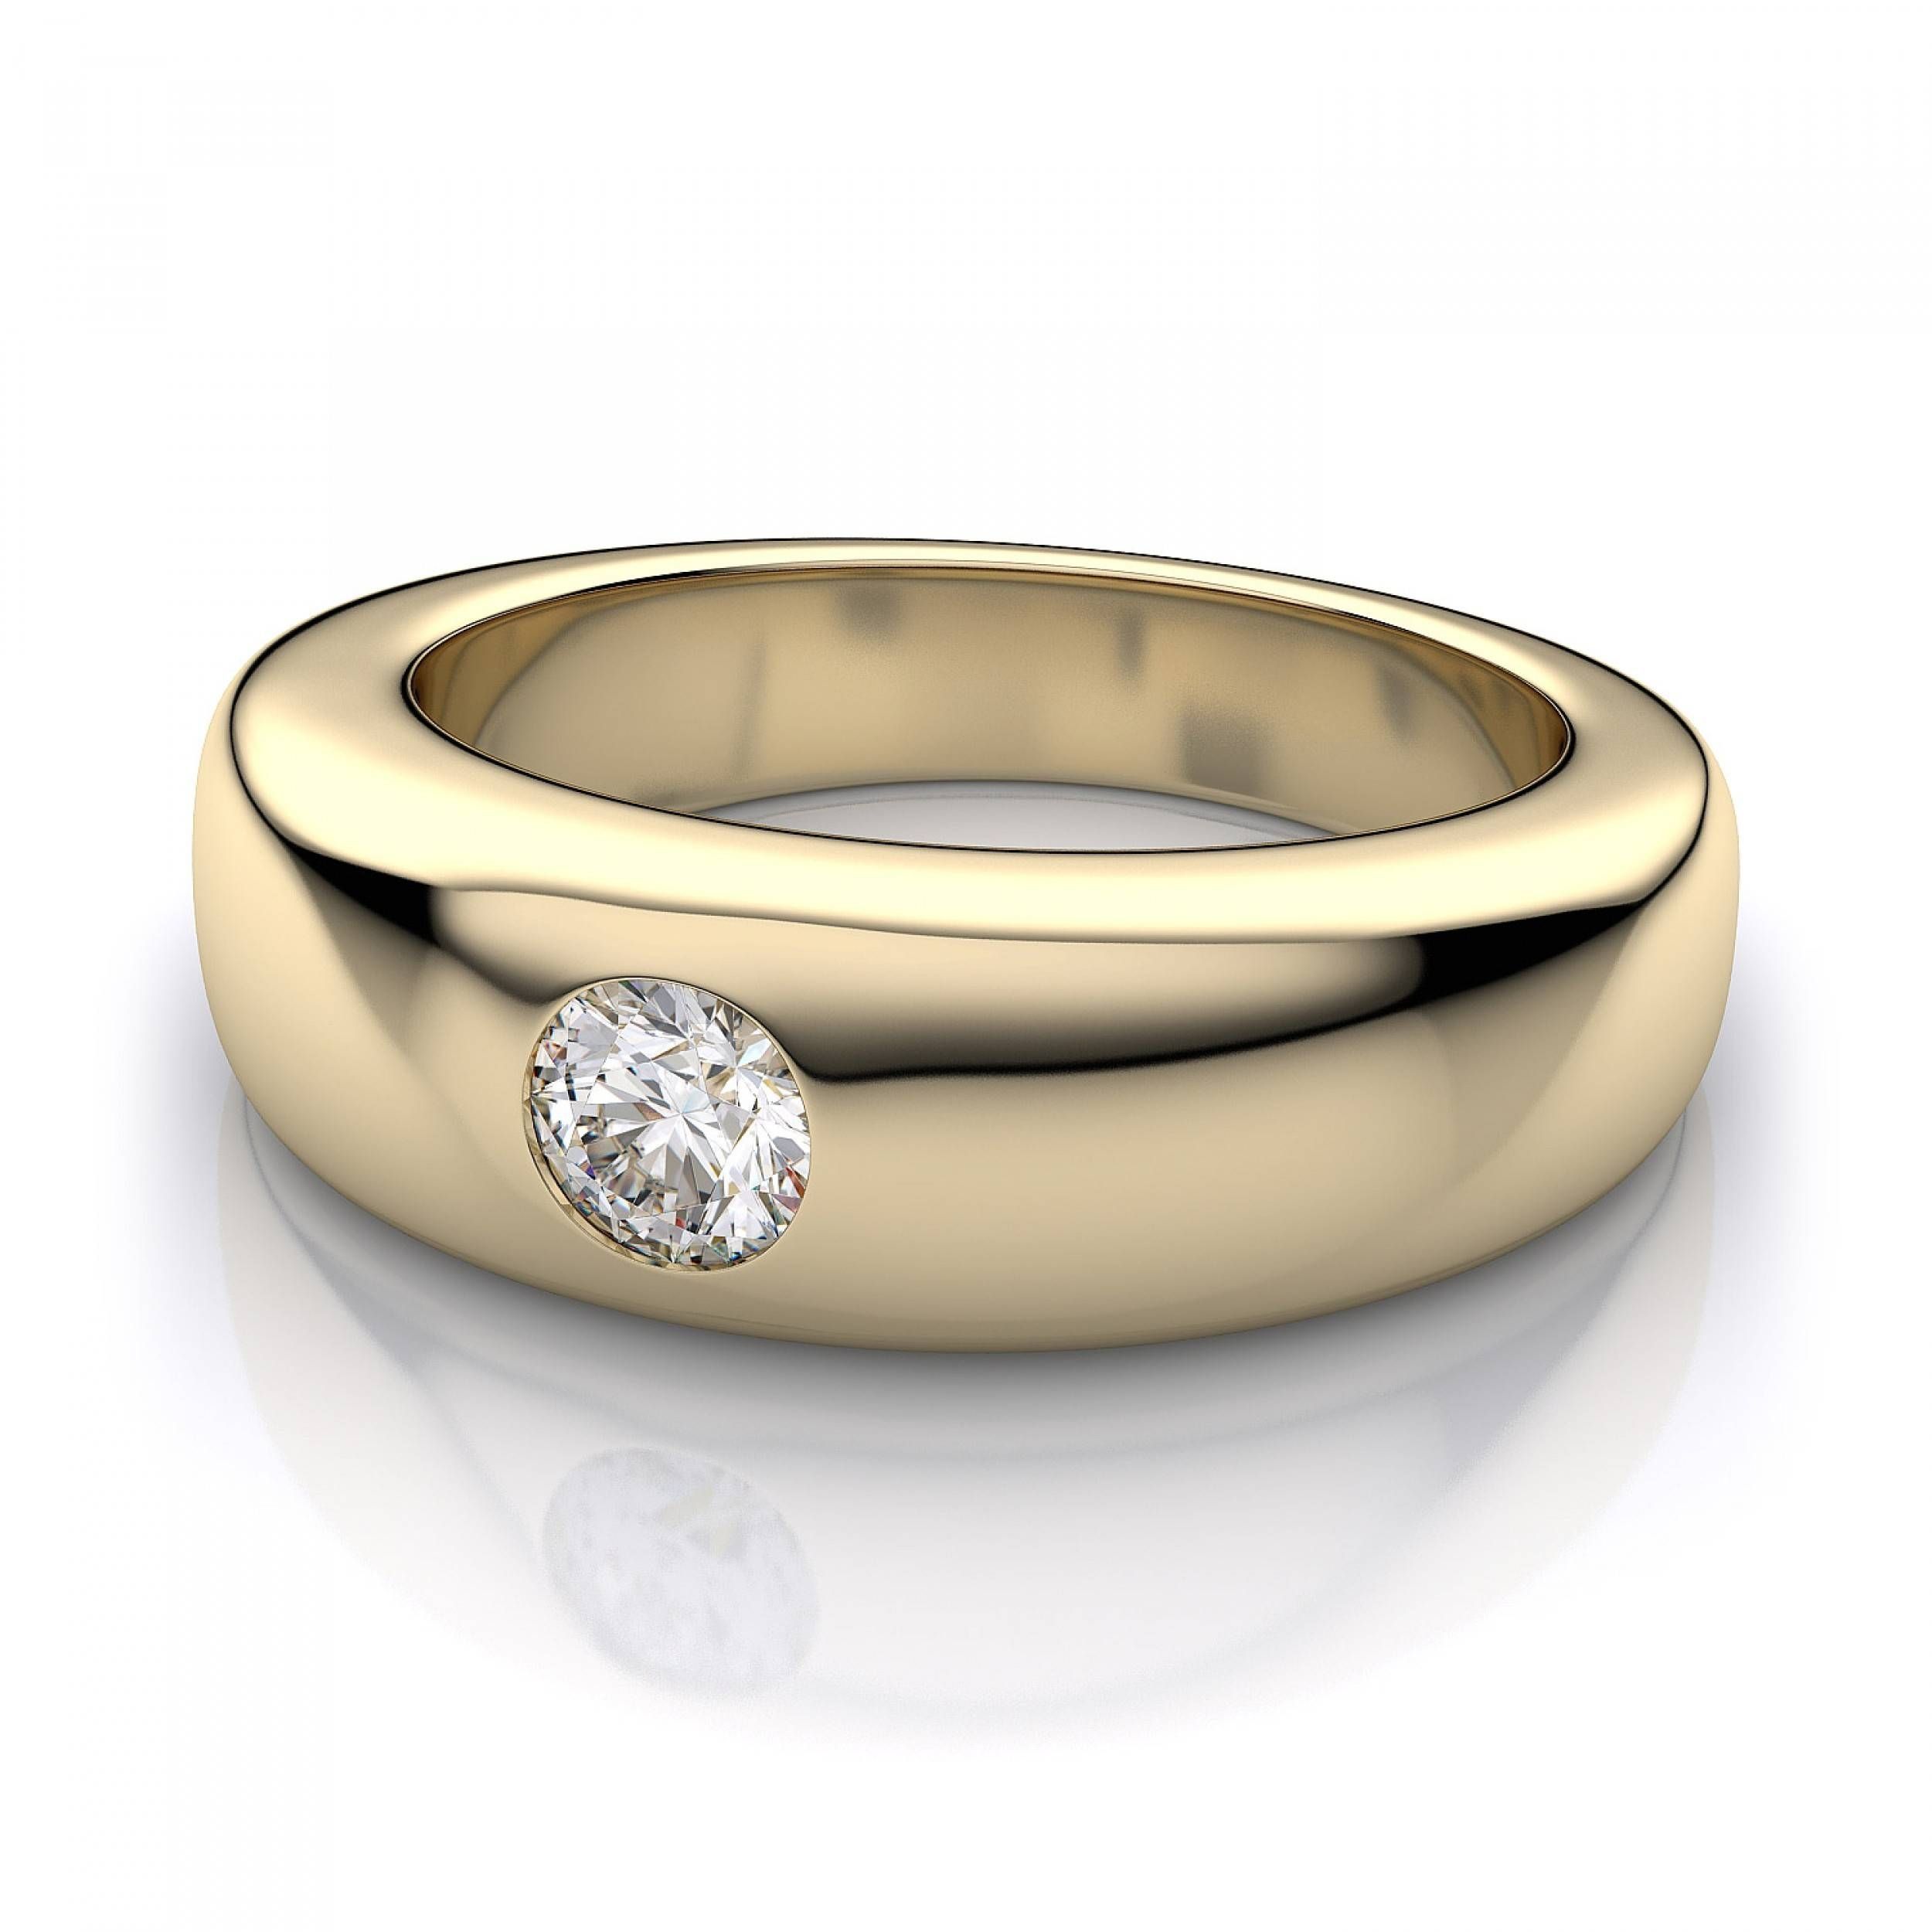 Wedding Rings Online Ireland Tags : Celtic Diamond Wedding Rings With Mens Yellow Gold Wedding Bands With Diamonds (View 15 of 15)